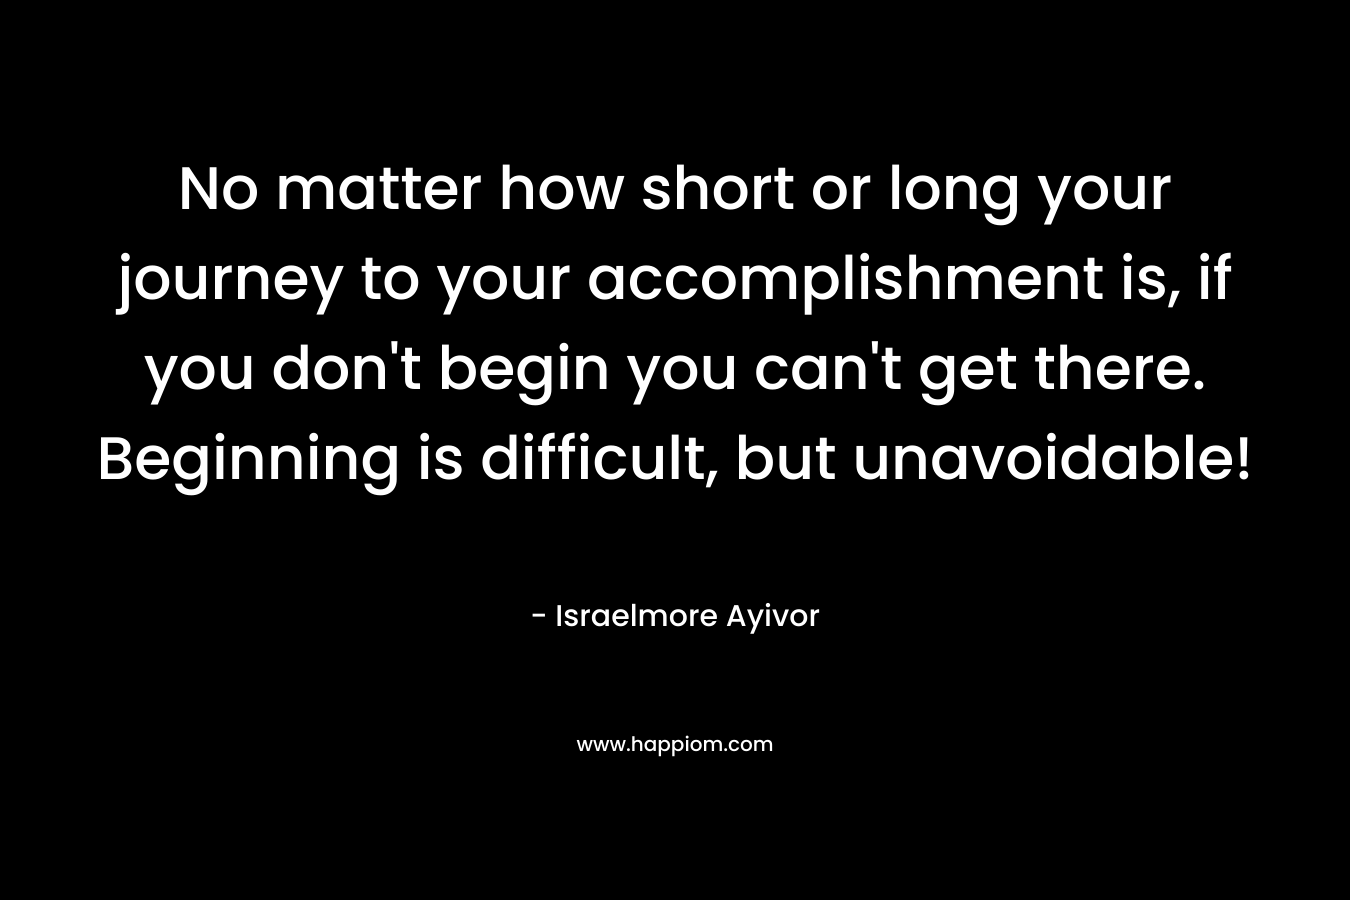 No matter how short or long your journey to your accomplishment is, if you don’t begin you can’t get there. Beginning is difficult, but unavoidable! – Israelmore Ayivor